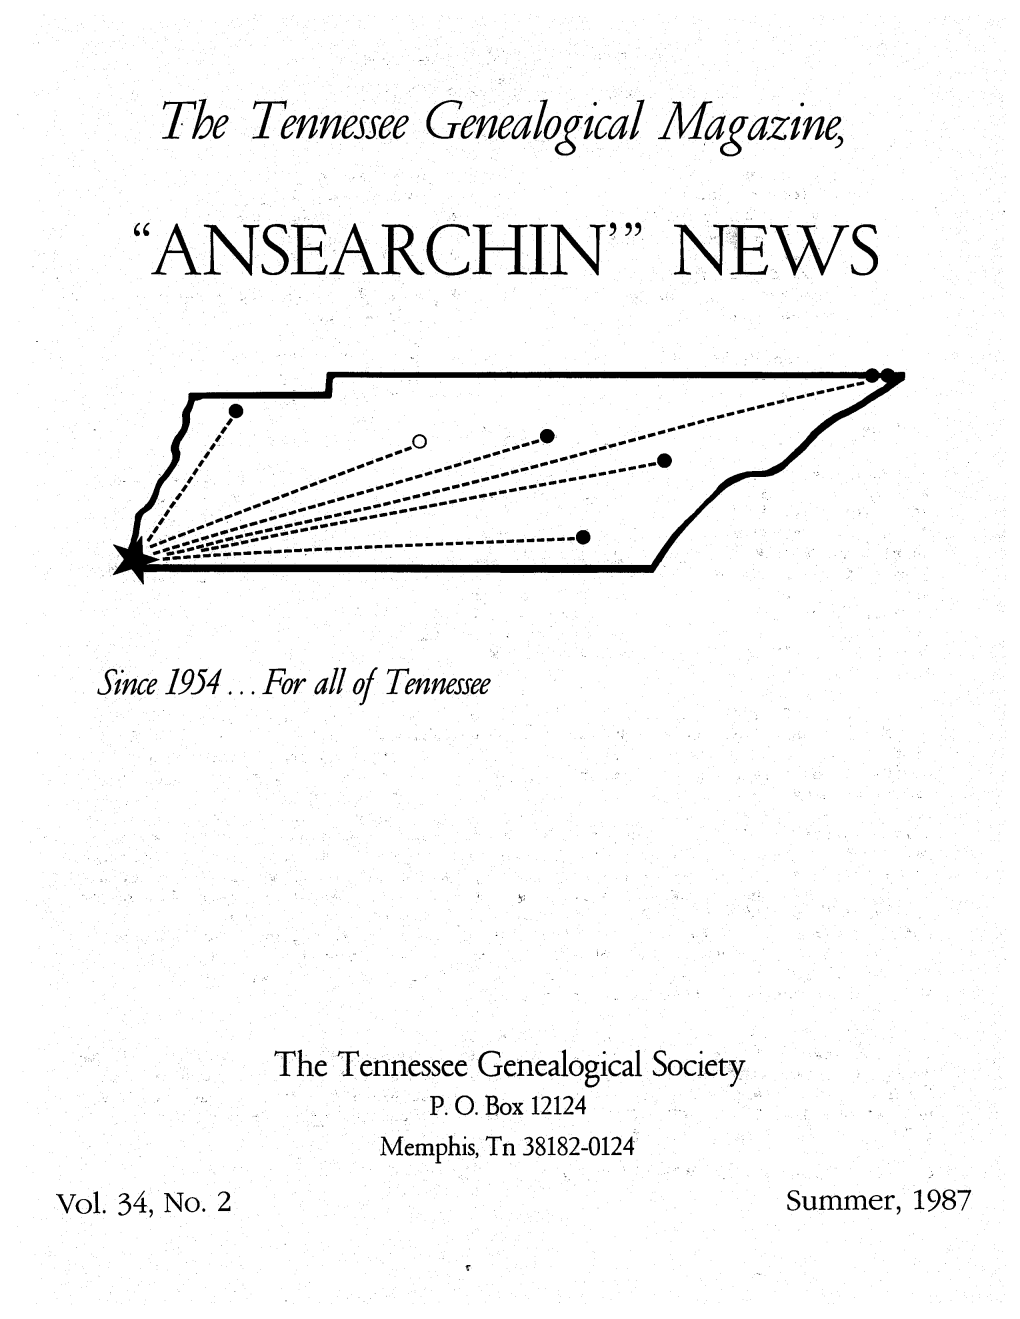 The Tennessee Genealogical Magazine, "ANSEARCHIN~ "NEWS